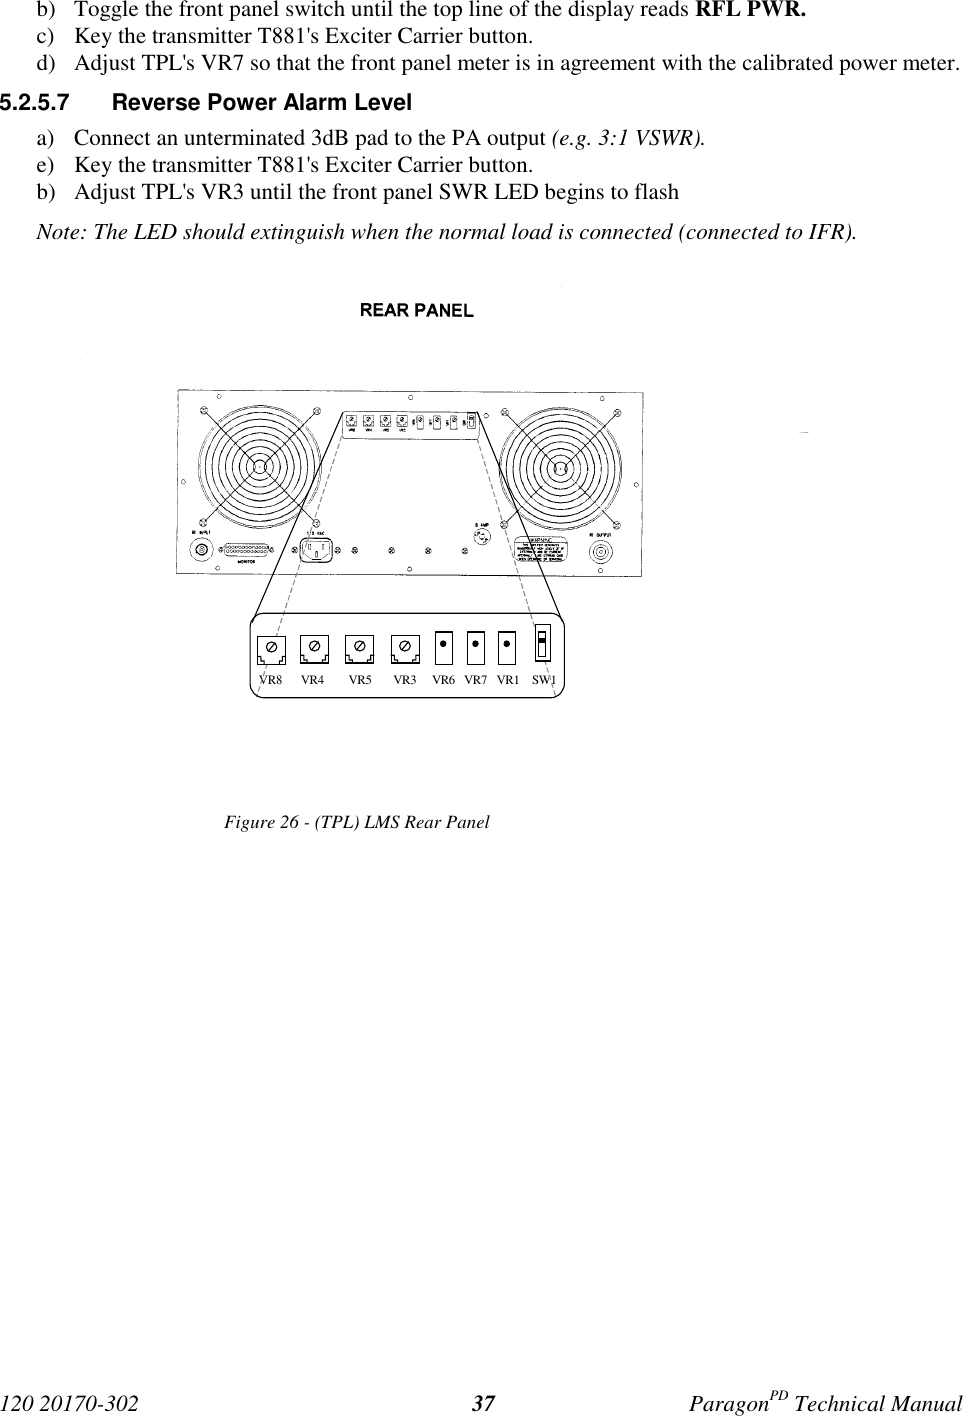 120 20170-302 ParagonPD Technical Manual37b) Toggle the front panel switch until the top line of the display reads RFL PWR.c) Key the transmitter T881&apos;s Exciter Carrier button.d) Adjust TPL&apos;s VR7 so that the front panel meter is in agreement with the calibrated power meter.5.2.5.7  Reverse Power Alarm Levela) Connect an unterminated 3dB pad to the PA output (e.g. 3:1 VSWR).e) Key the transmitter T881&apos;s Exciter Carrier button.b) Adjust TPL&apos;s VR3 until the front panel SWR LED begins to flashNote: The LED should extinguish when the normal load is connected (connected to IFR).Figure 26 - (TPL) LMS Rear Panel VR8      VR4        VR5       VR3     VR6   VR7   VR1    SW1